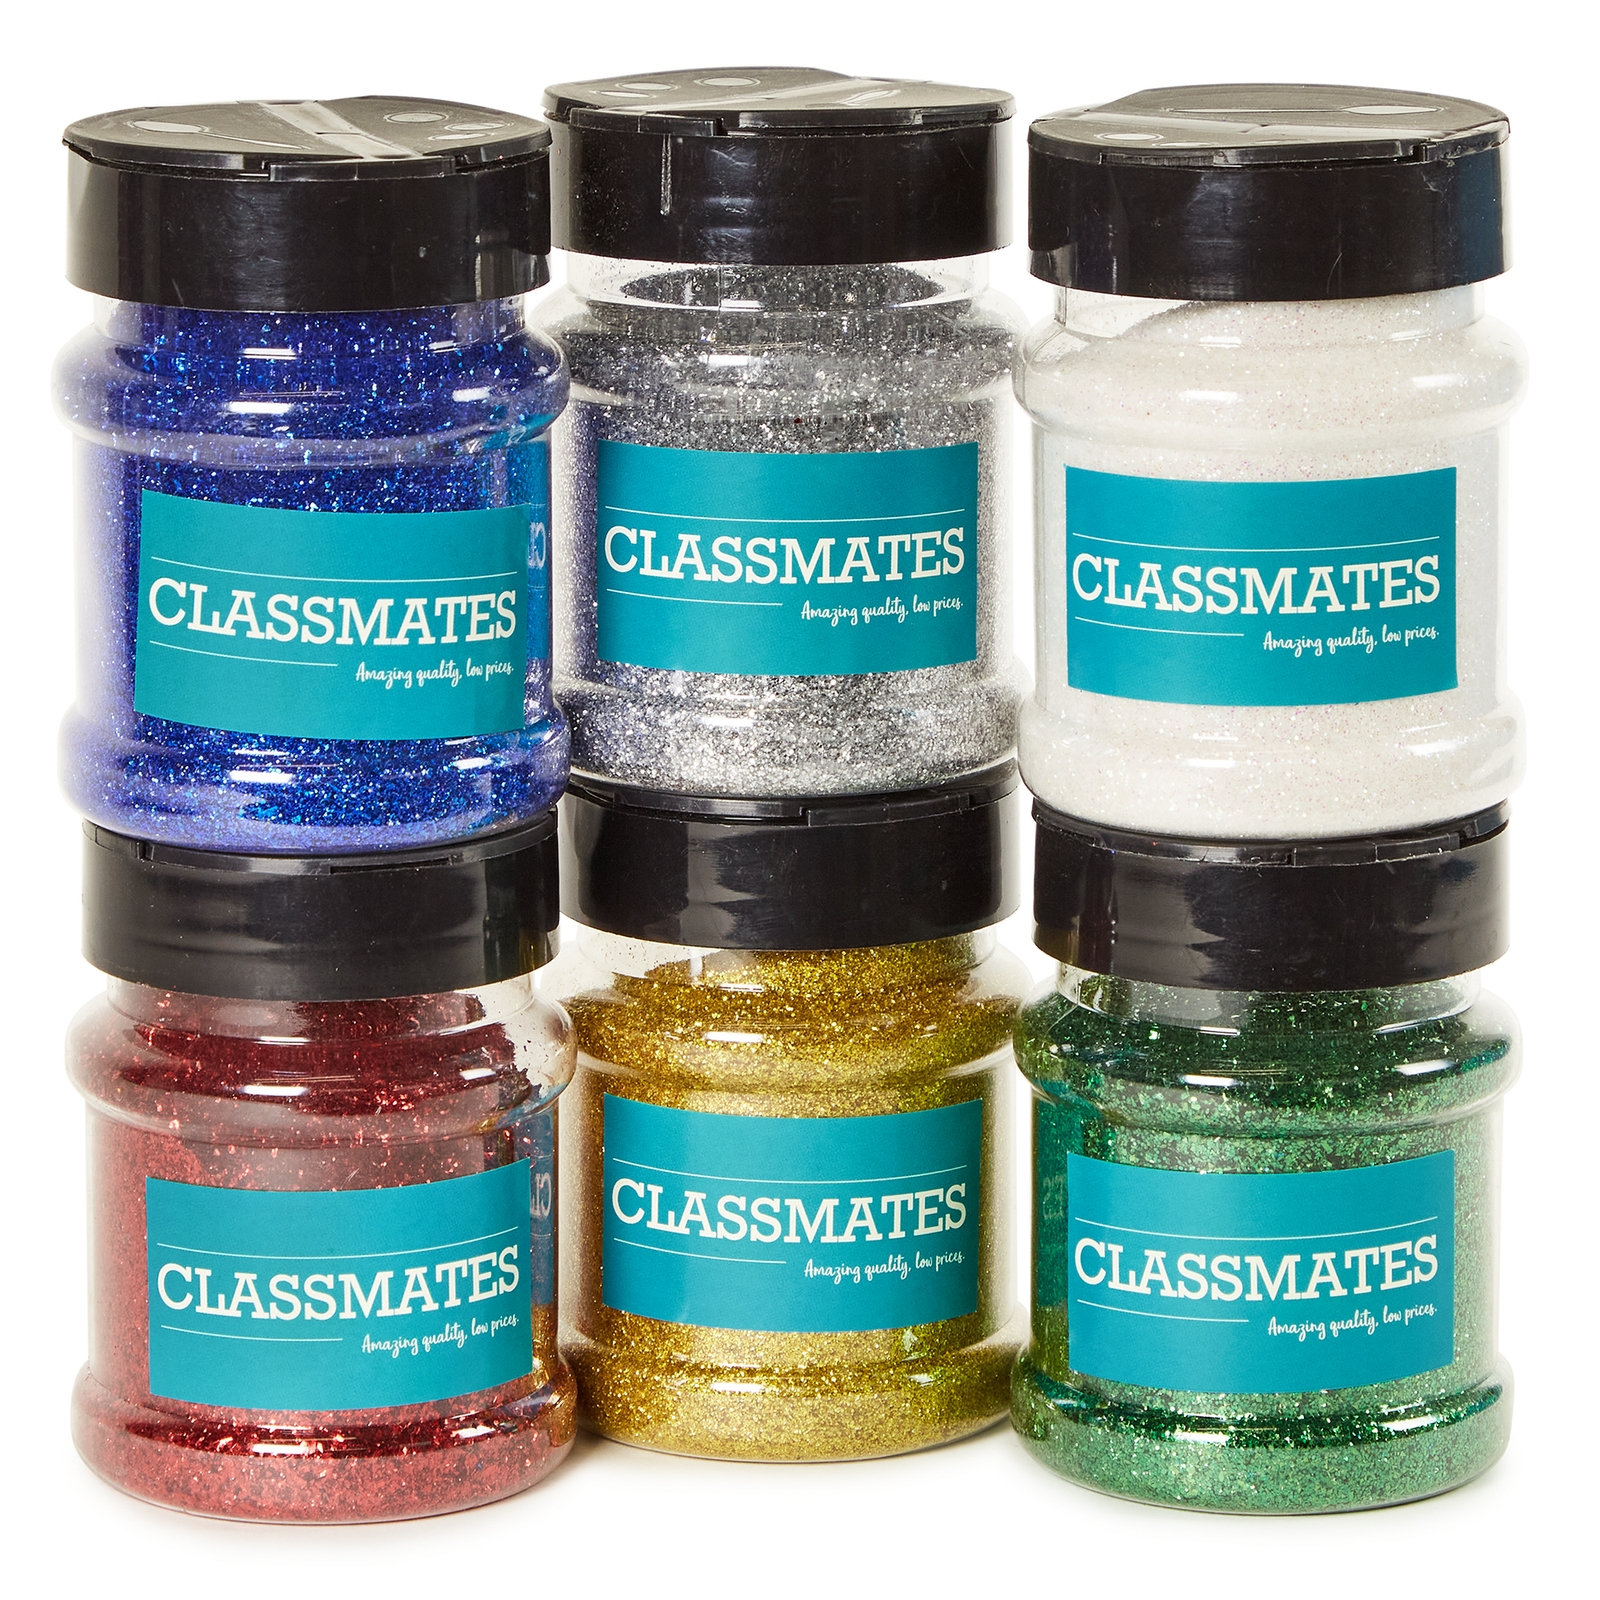 Classmates 100g Glitter Tubs - Assorted Pack of 6